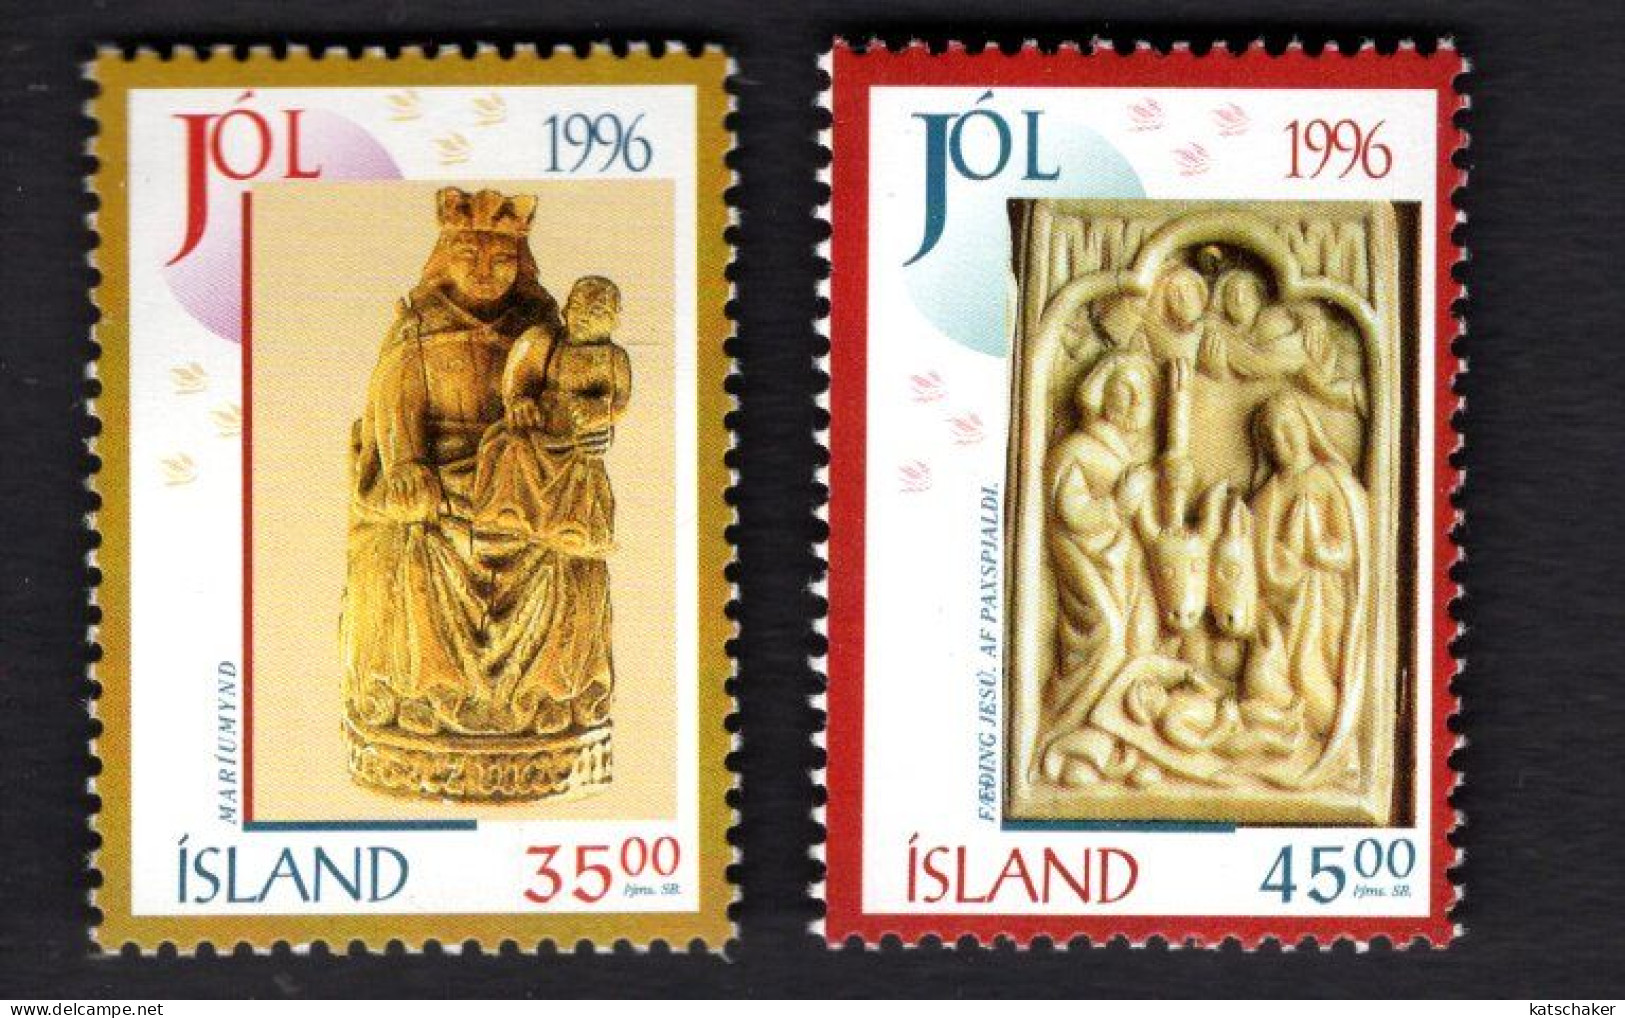 2022474959 1996 SCOTT 832 833 (XX)  POSTFRIS MINT NEVER HINGED - CHRISTMAS - ARTIFACTS FROM NATL MUSEUM OF ICELAND - Unused Stamps